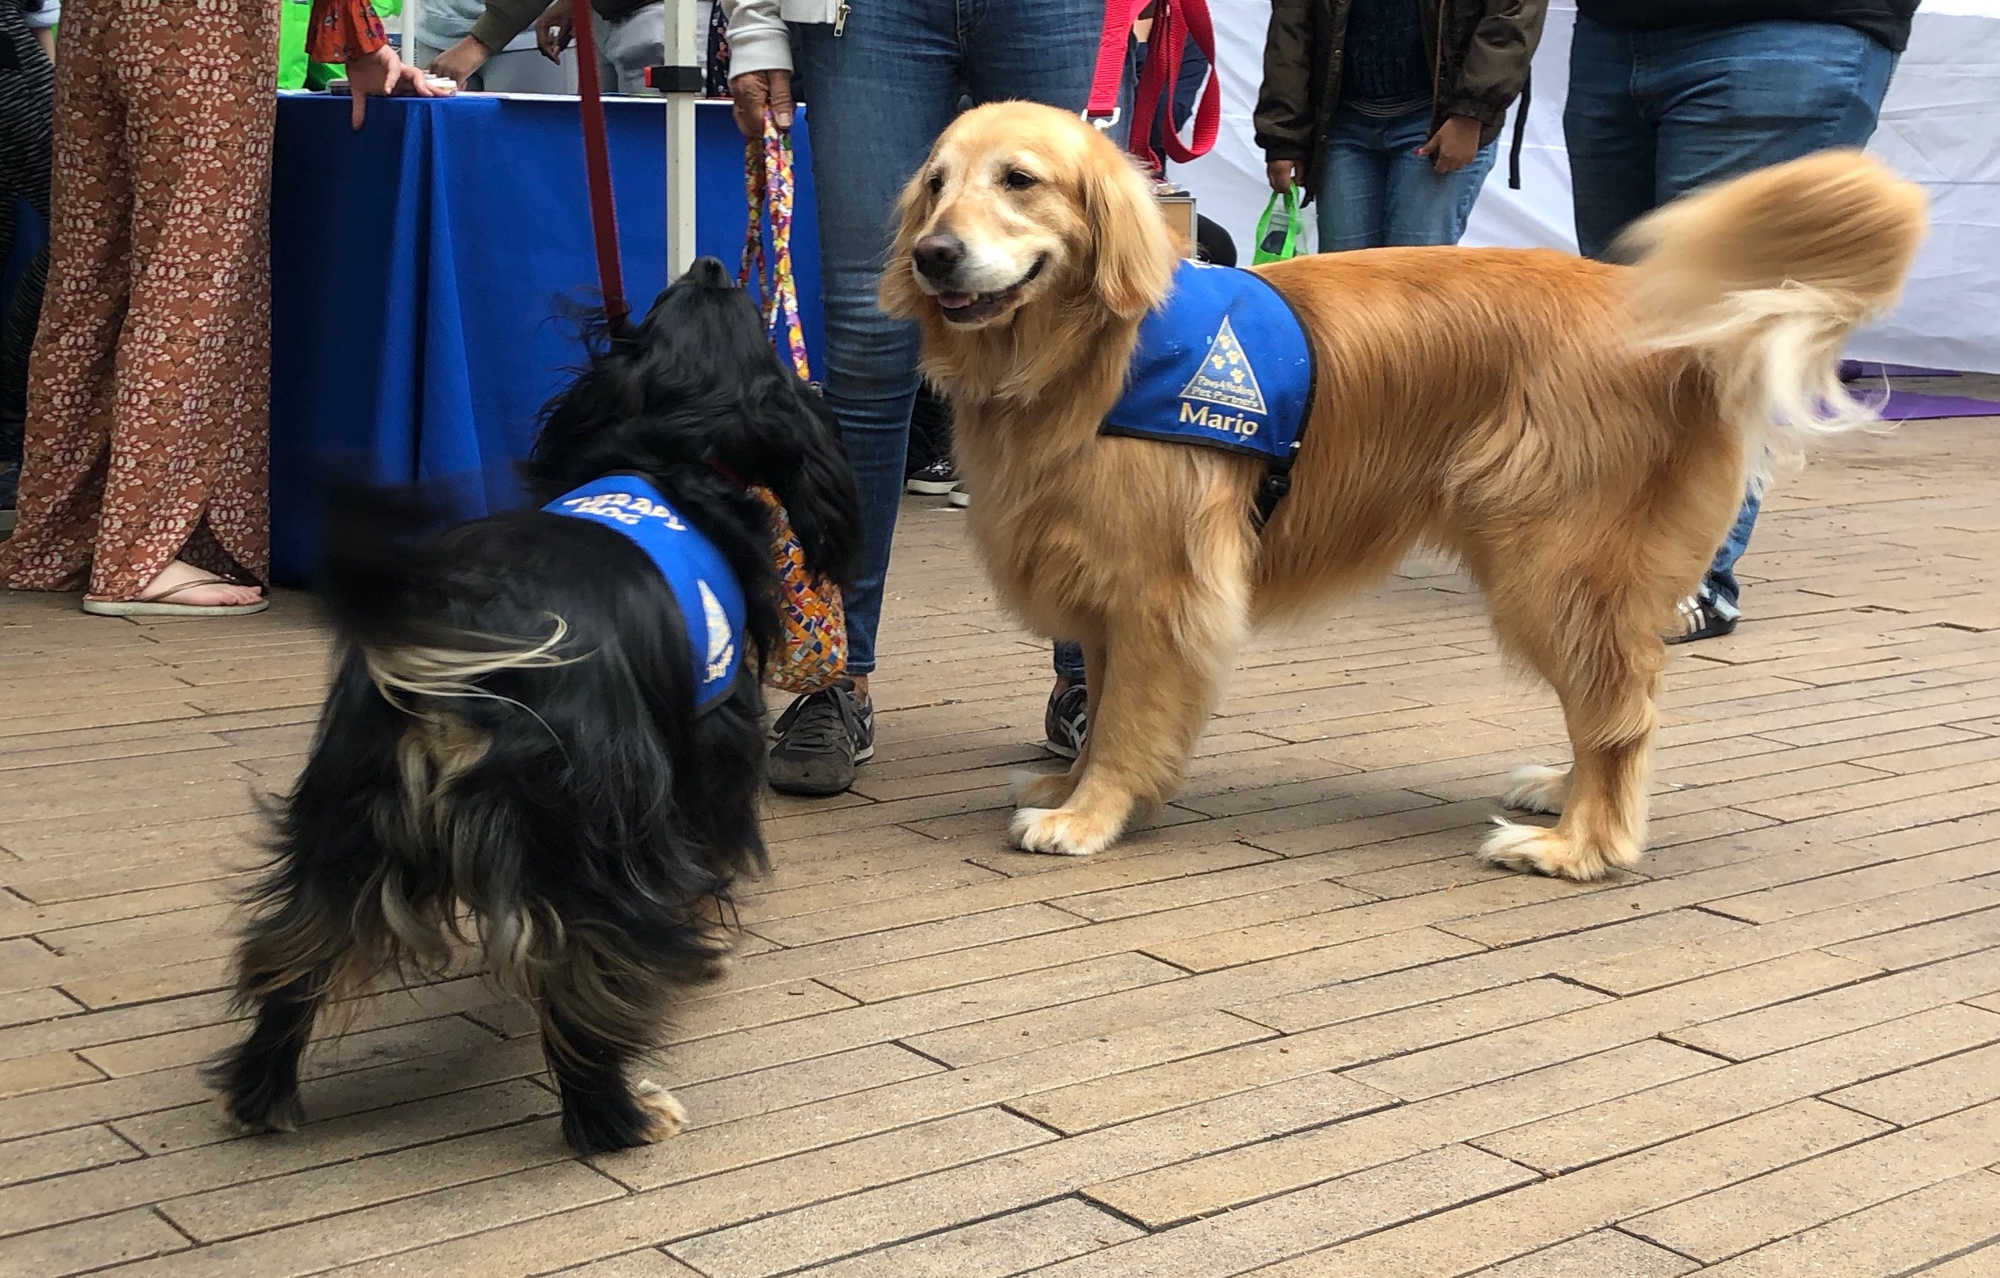  Therapy dogs Clayton (left) and Mario (right), came by Active Minds event on Thursday, May 24, 2018 at Santa Monica College, in Santa Monica, California to say hello to students and help reduce their stress. (Jennifer Nystrom/Corsair Photo) 